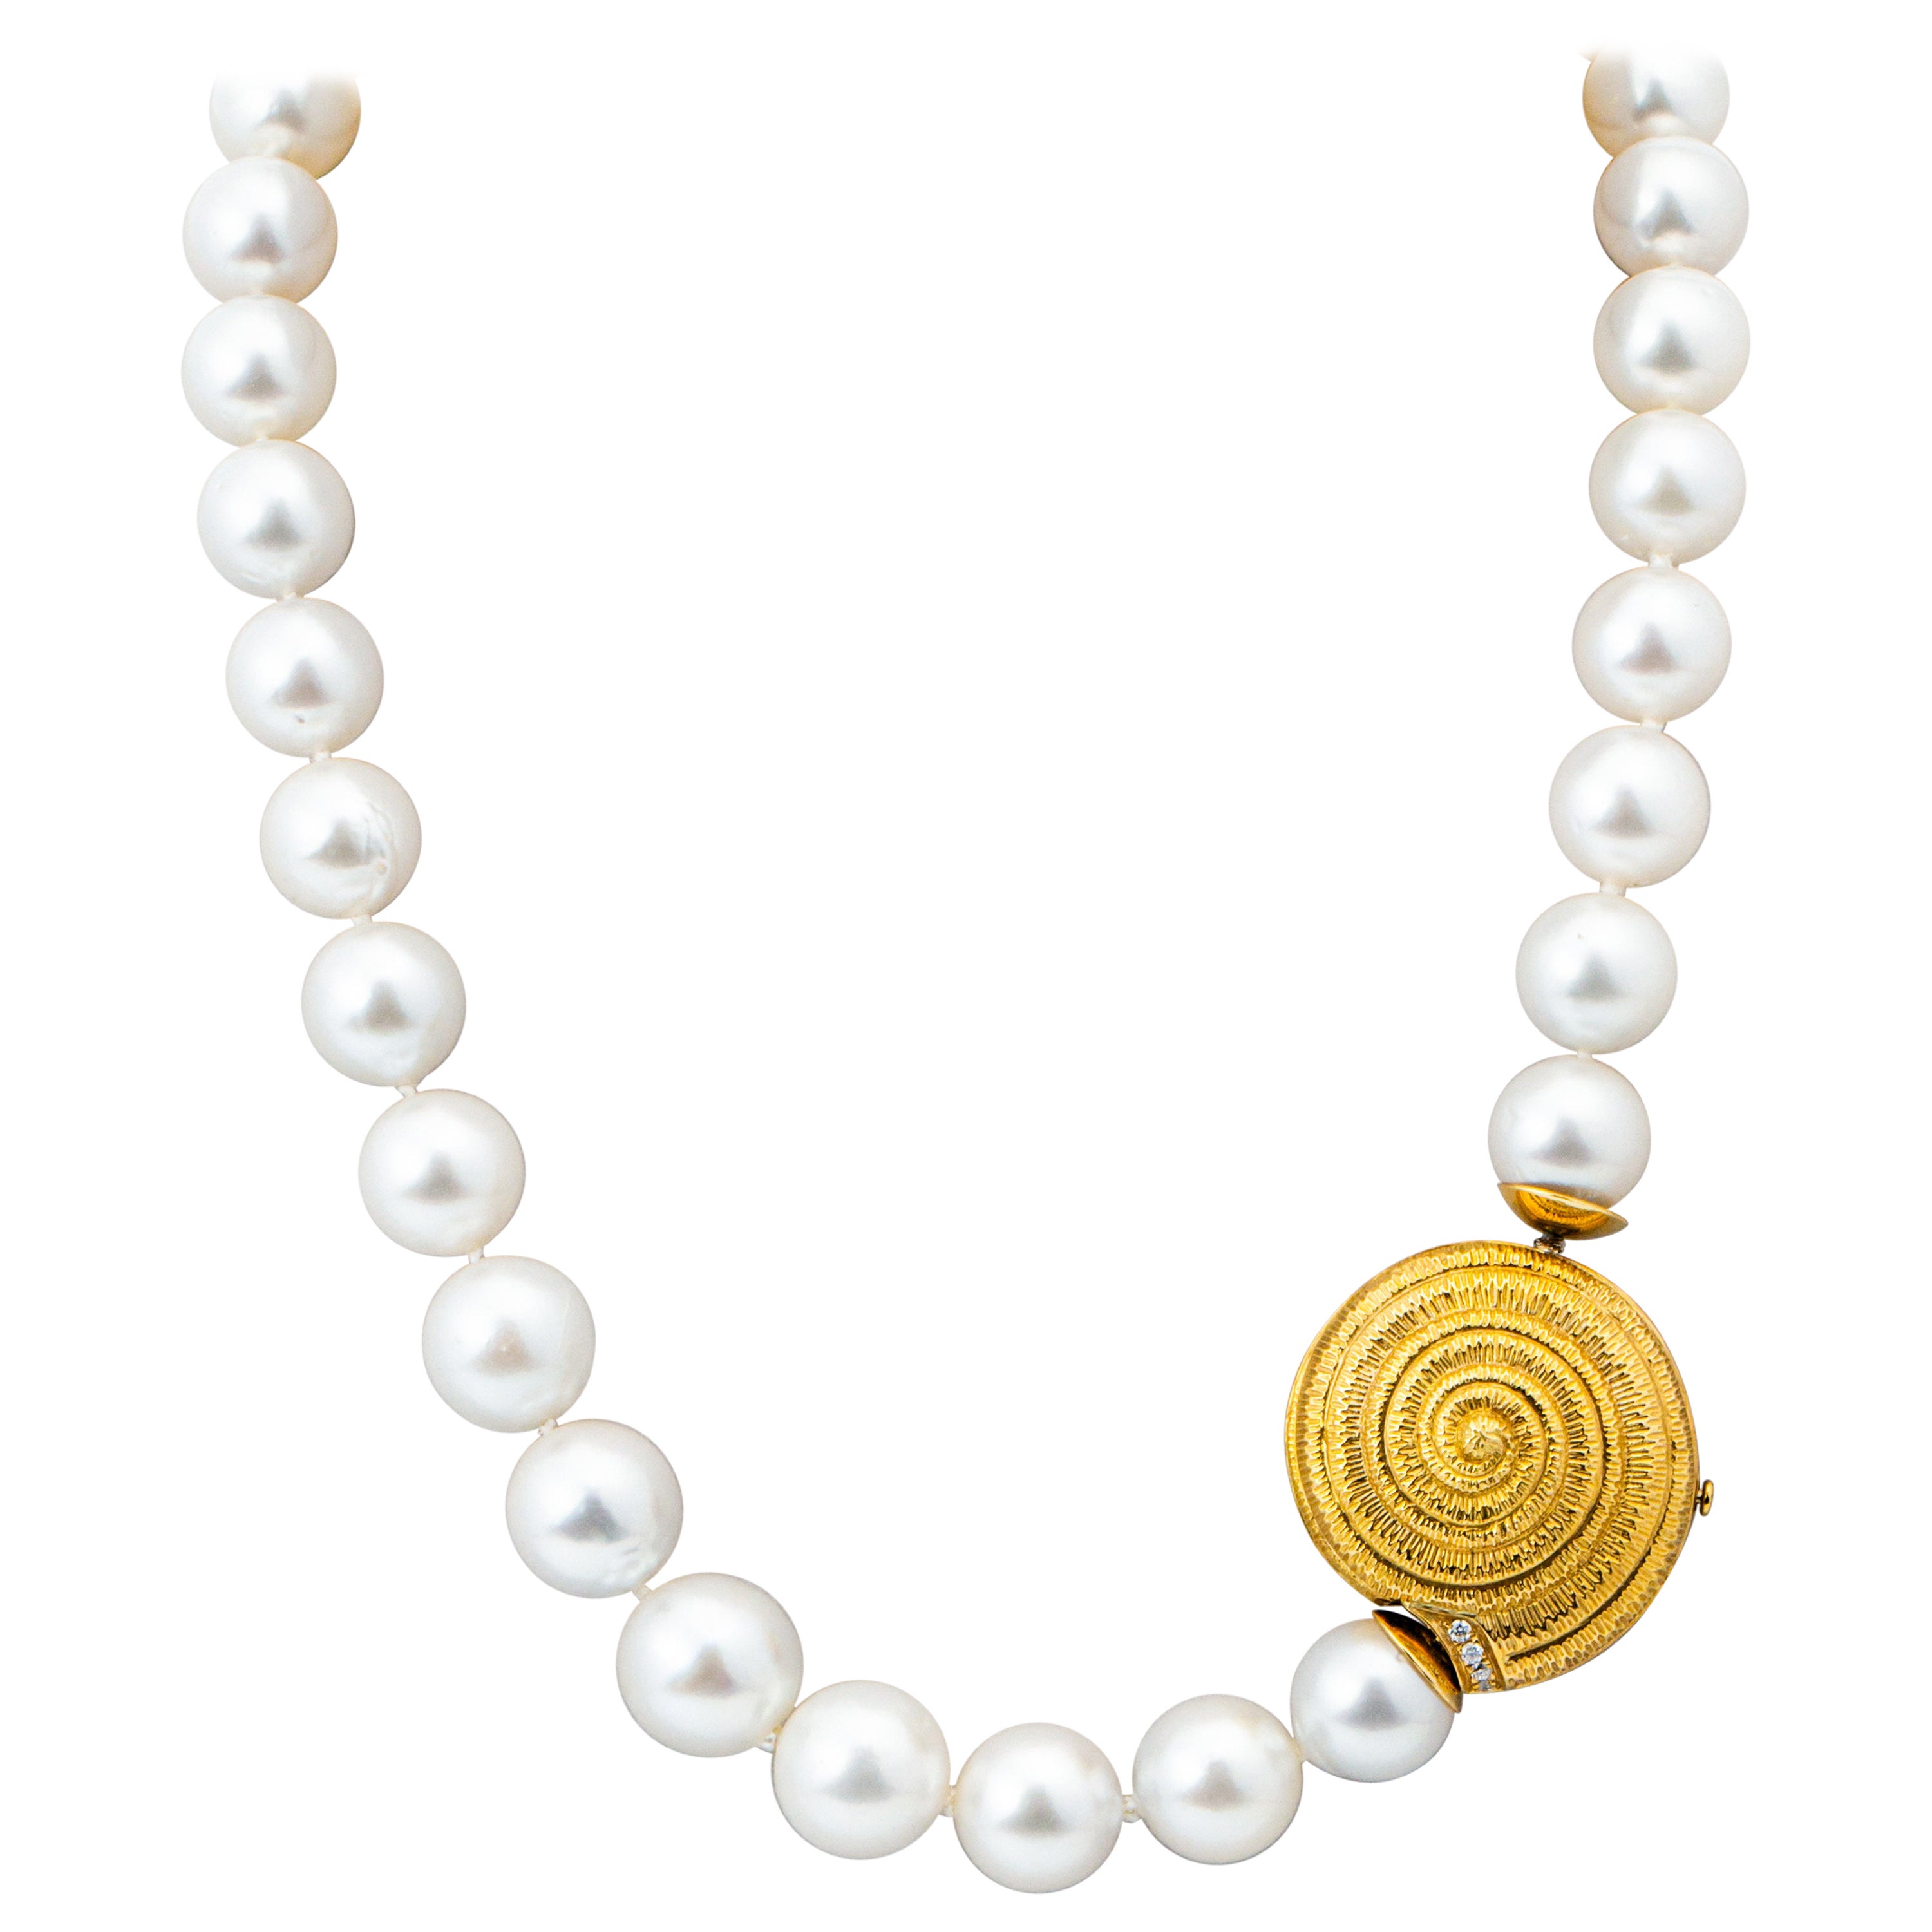 "Costis" Snail Shell White Pearls Necklace with Watch-Like Clasp For Sale